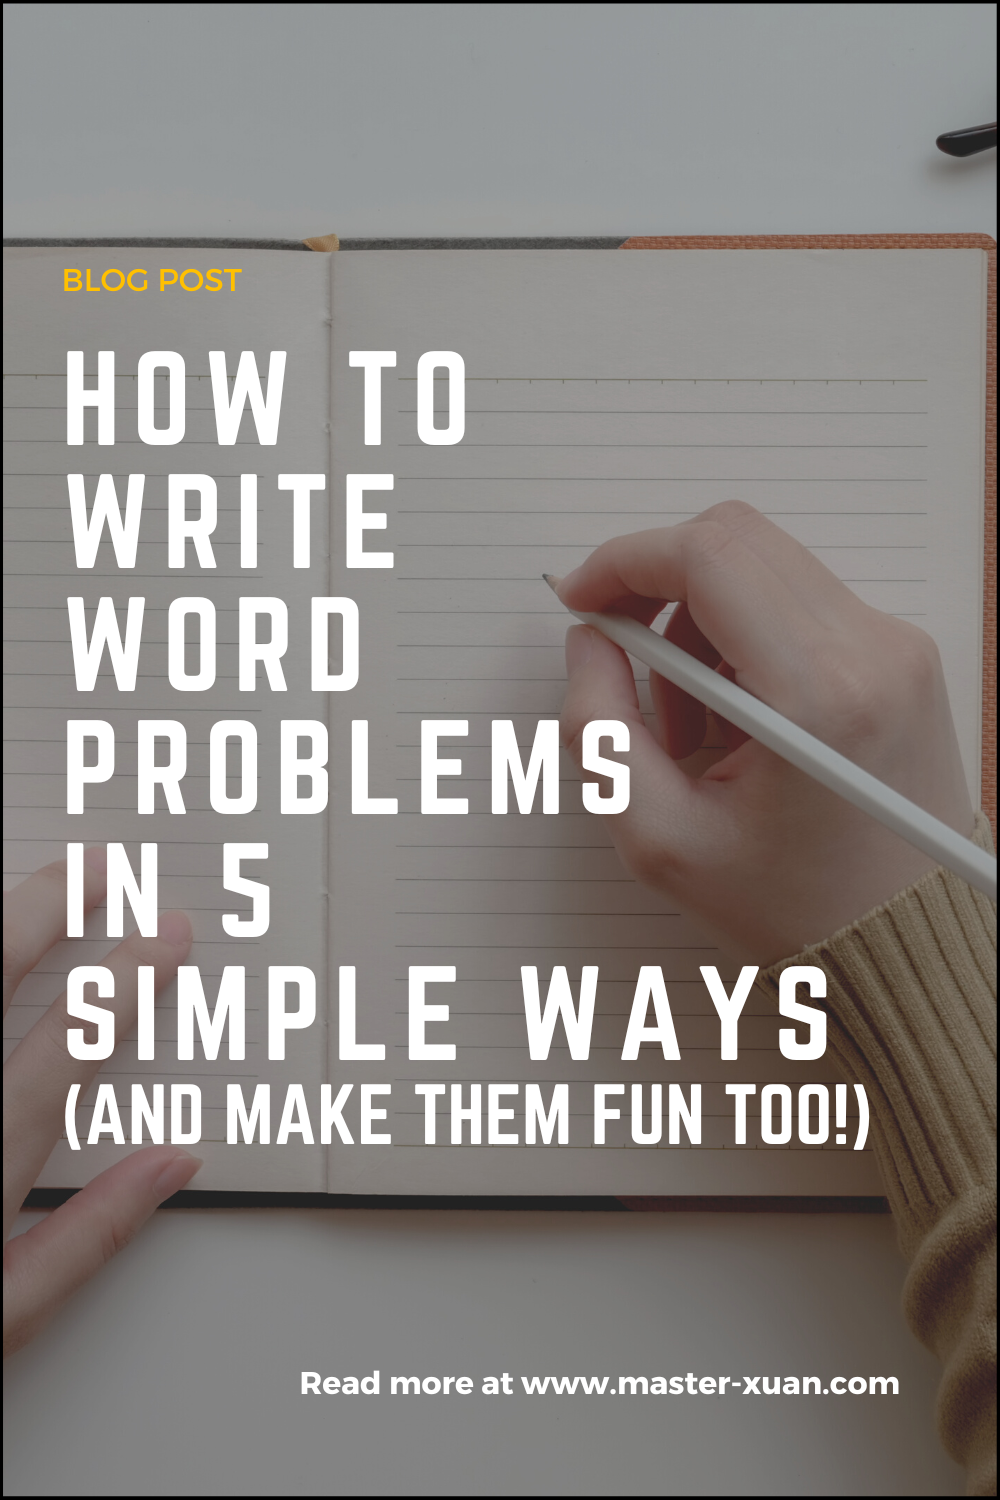 How to write word problems in 5 simple ways and make them fun too!